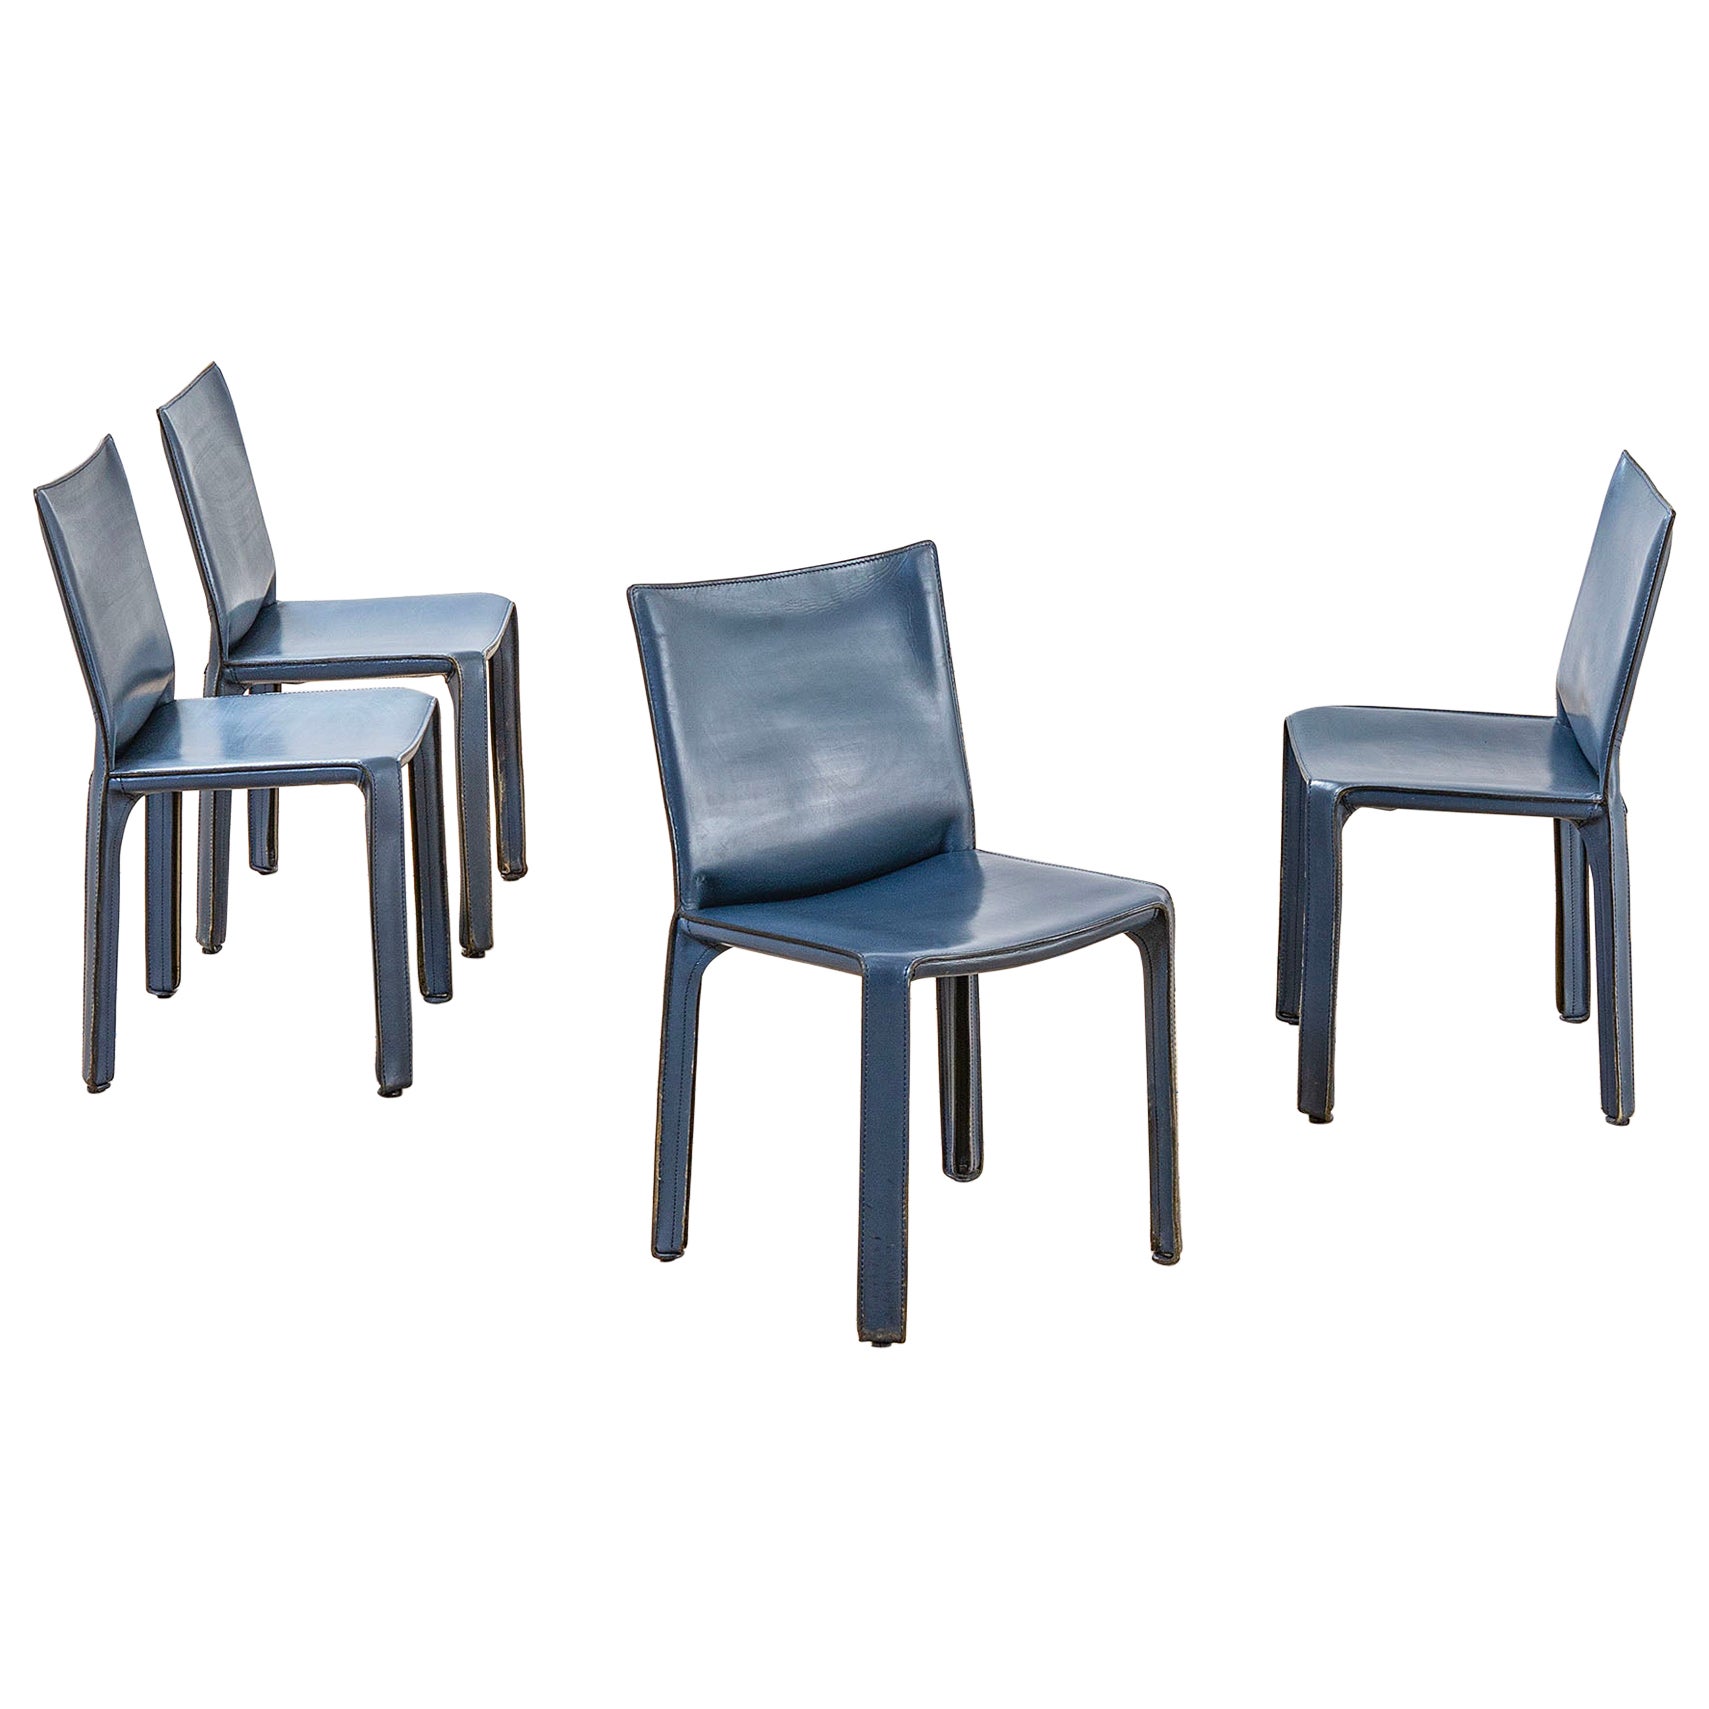 20th Century Mario Bellini Set of 4 Chairs mod. Cab in Blue for Cassina, 70s For Sale